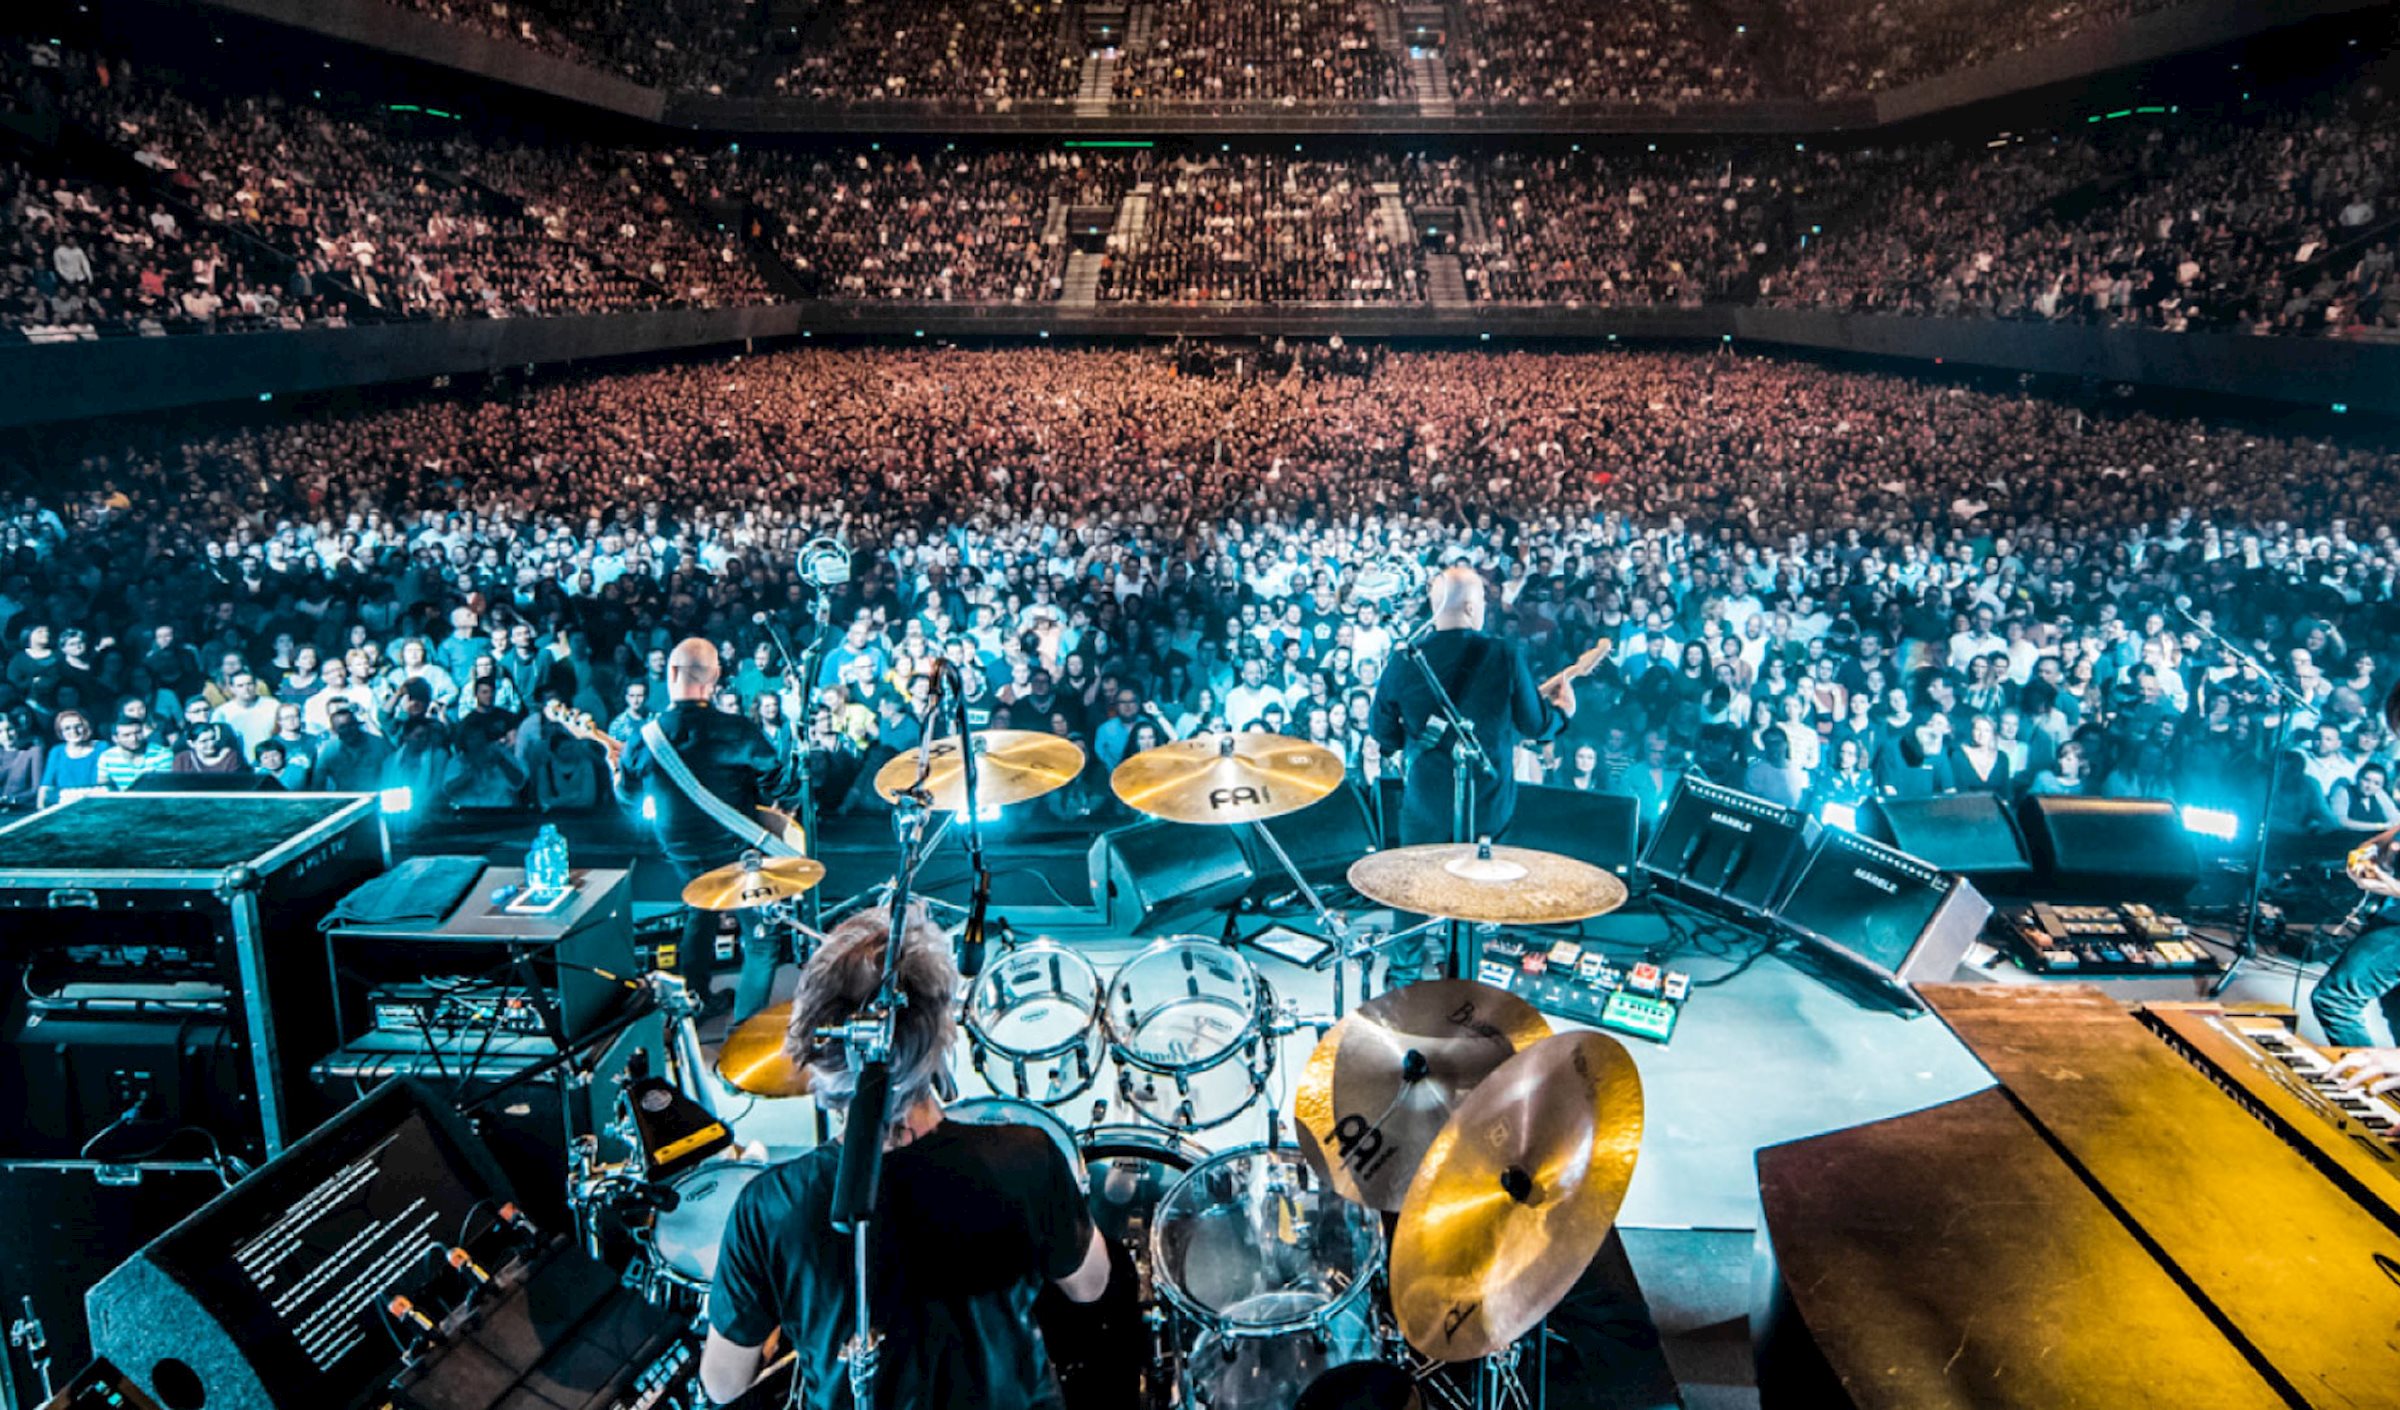 The legendary Dutch rock band BLØF took the stage in a sold-out Ziggo Dome in Amsterdam. 17.000 fans had gathered for a spectacular show full of surprises provided by PRG.